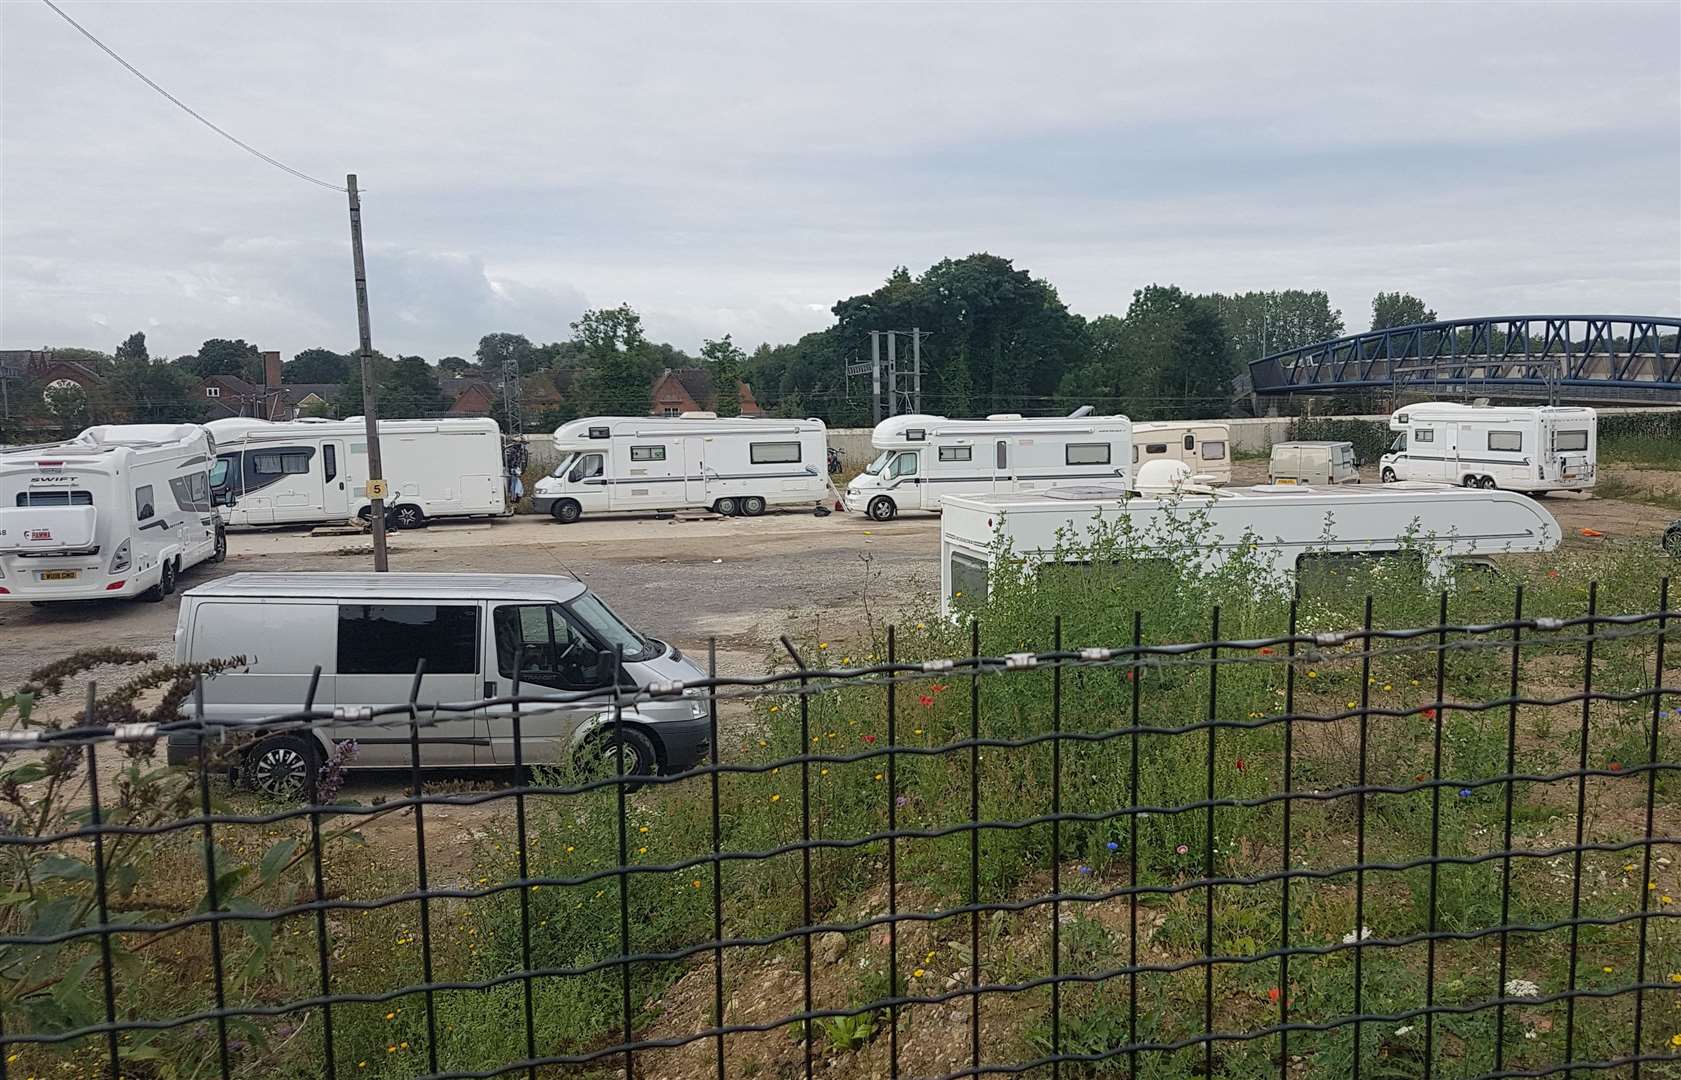 The travellers remain on the Elwick Road site in Ashford